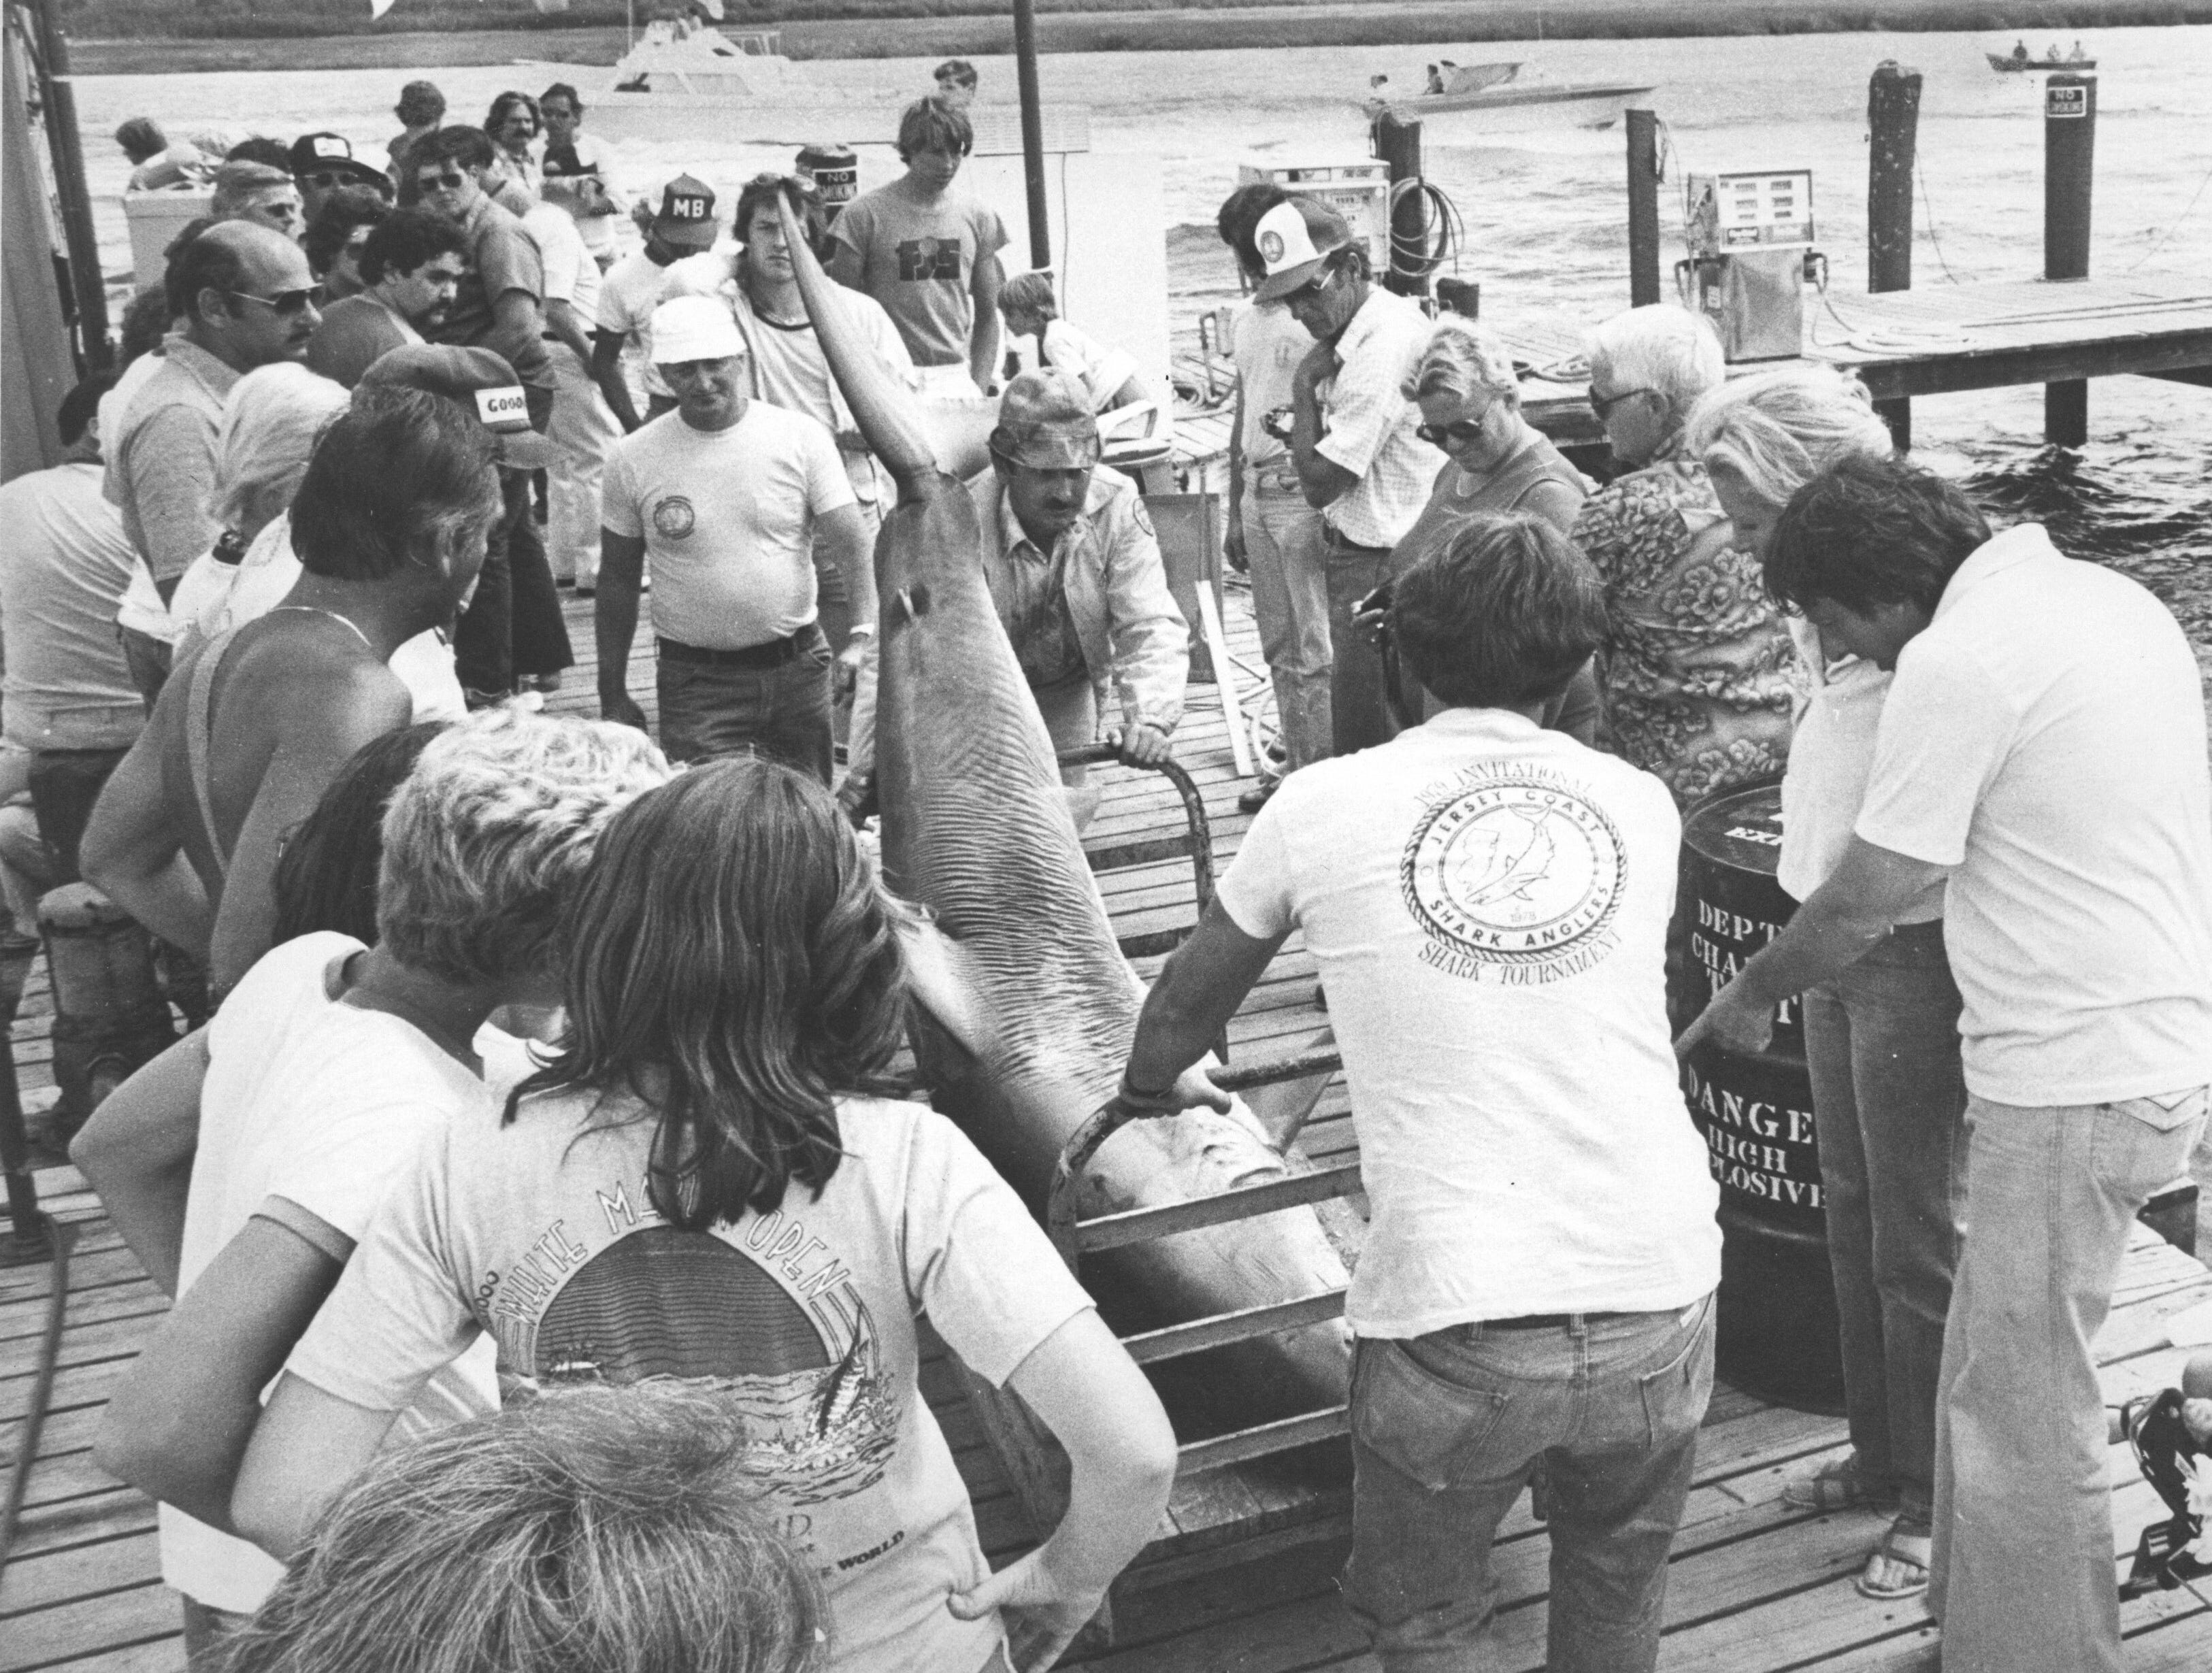 (JULY 9, 1979) A small crowd watches a mako shark being hauled away for weighing during a shark contest at Hoffman's Anchorage in Brielle.